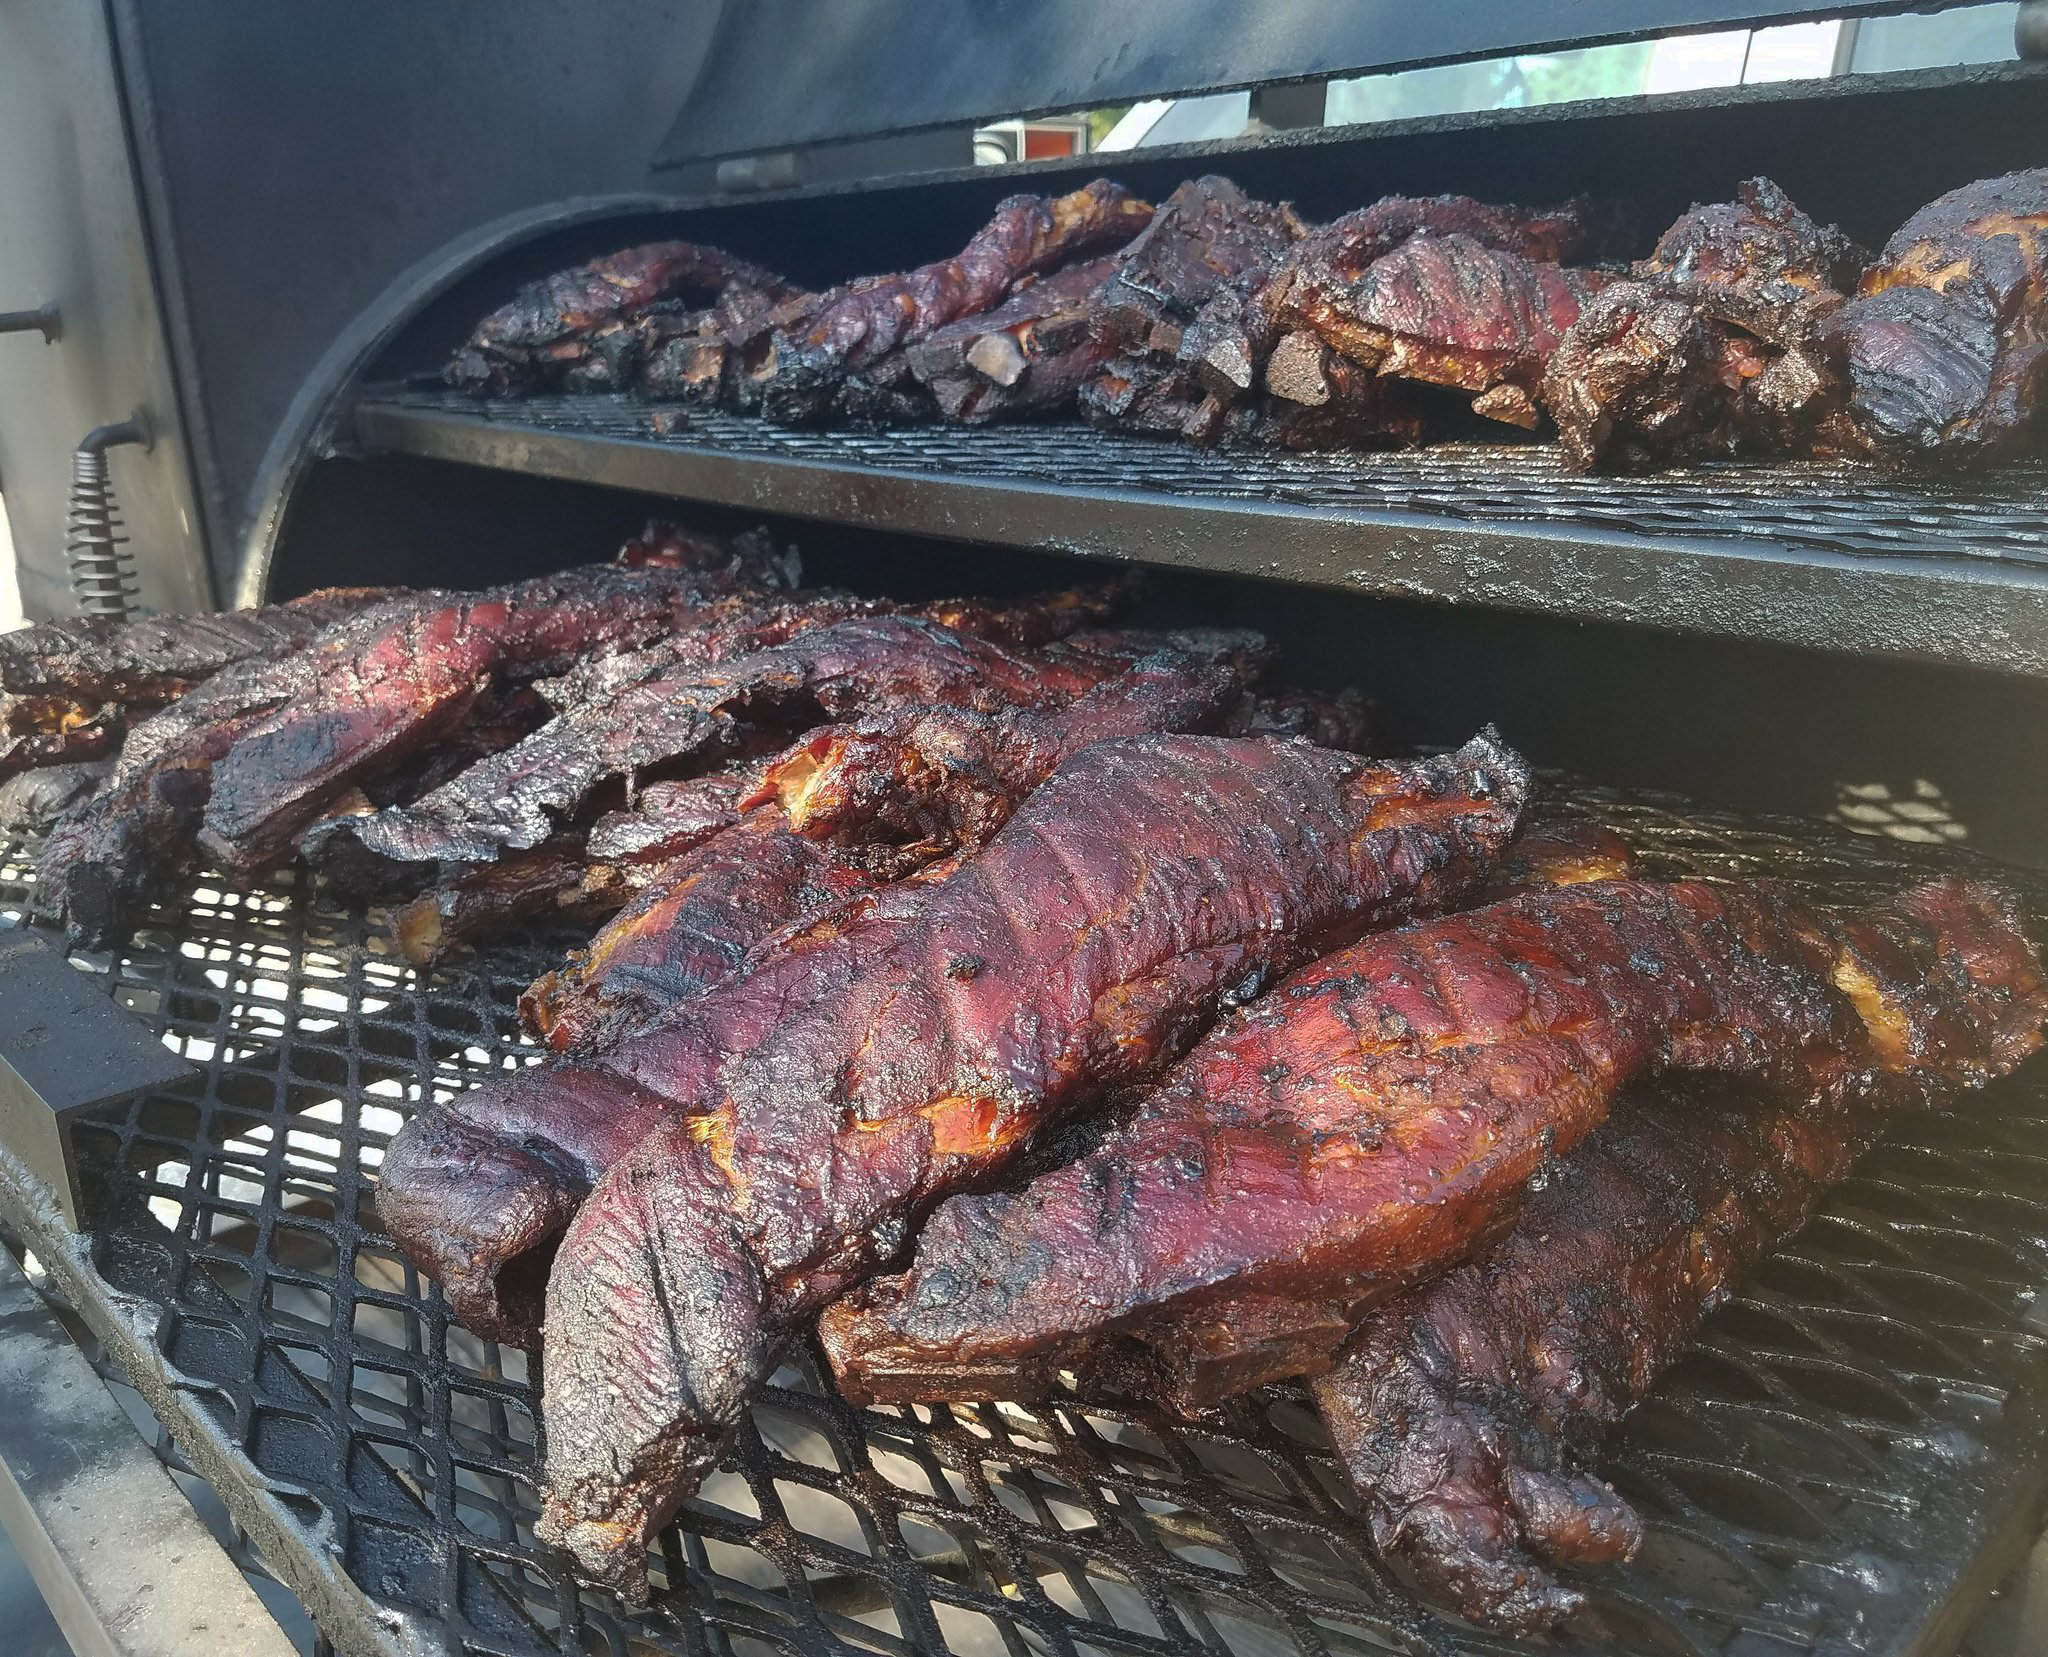 Slow-Smoked Meats and More on Our Texas BBQ Menu